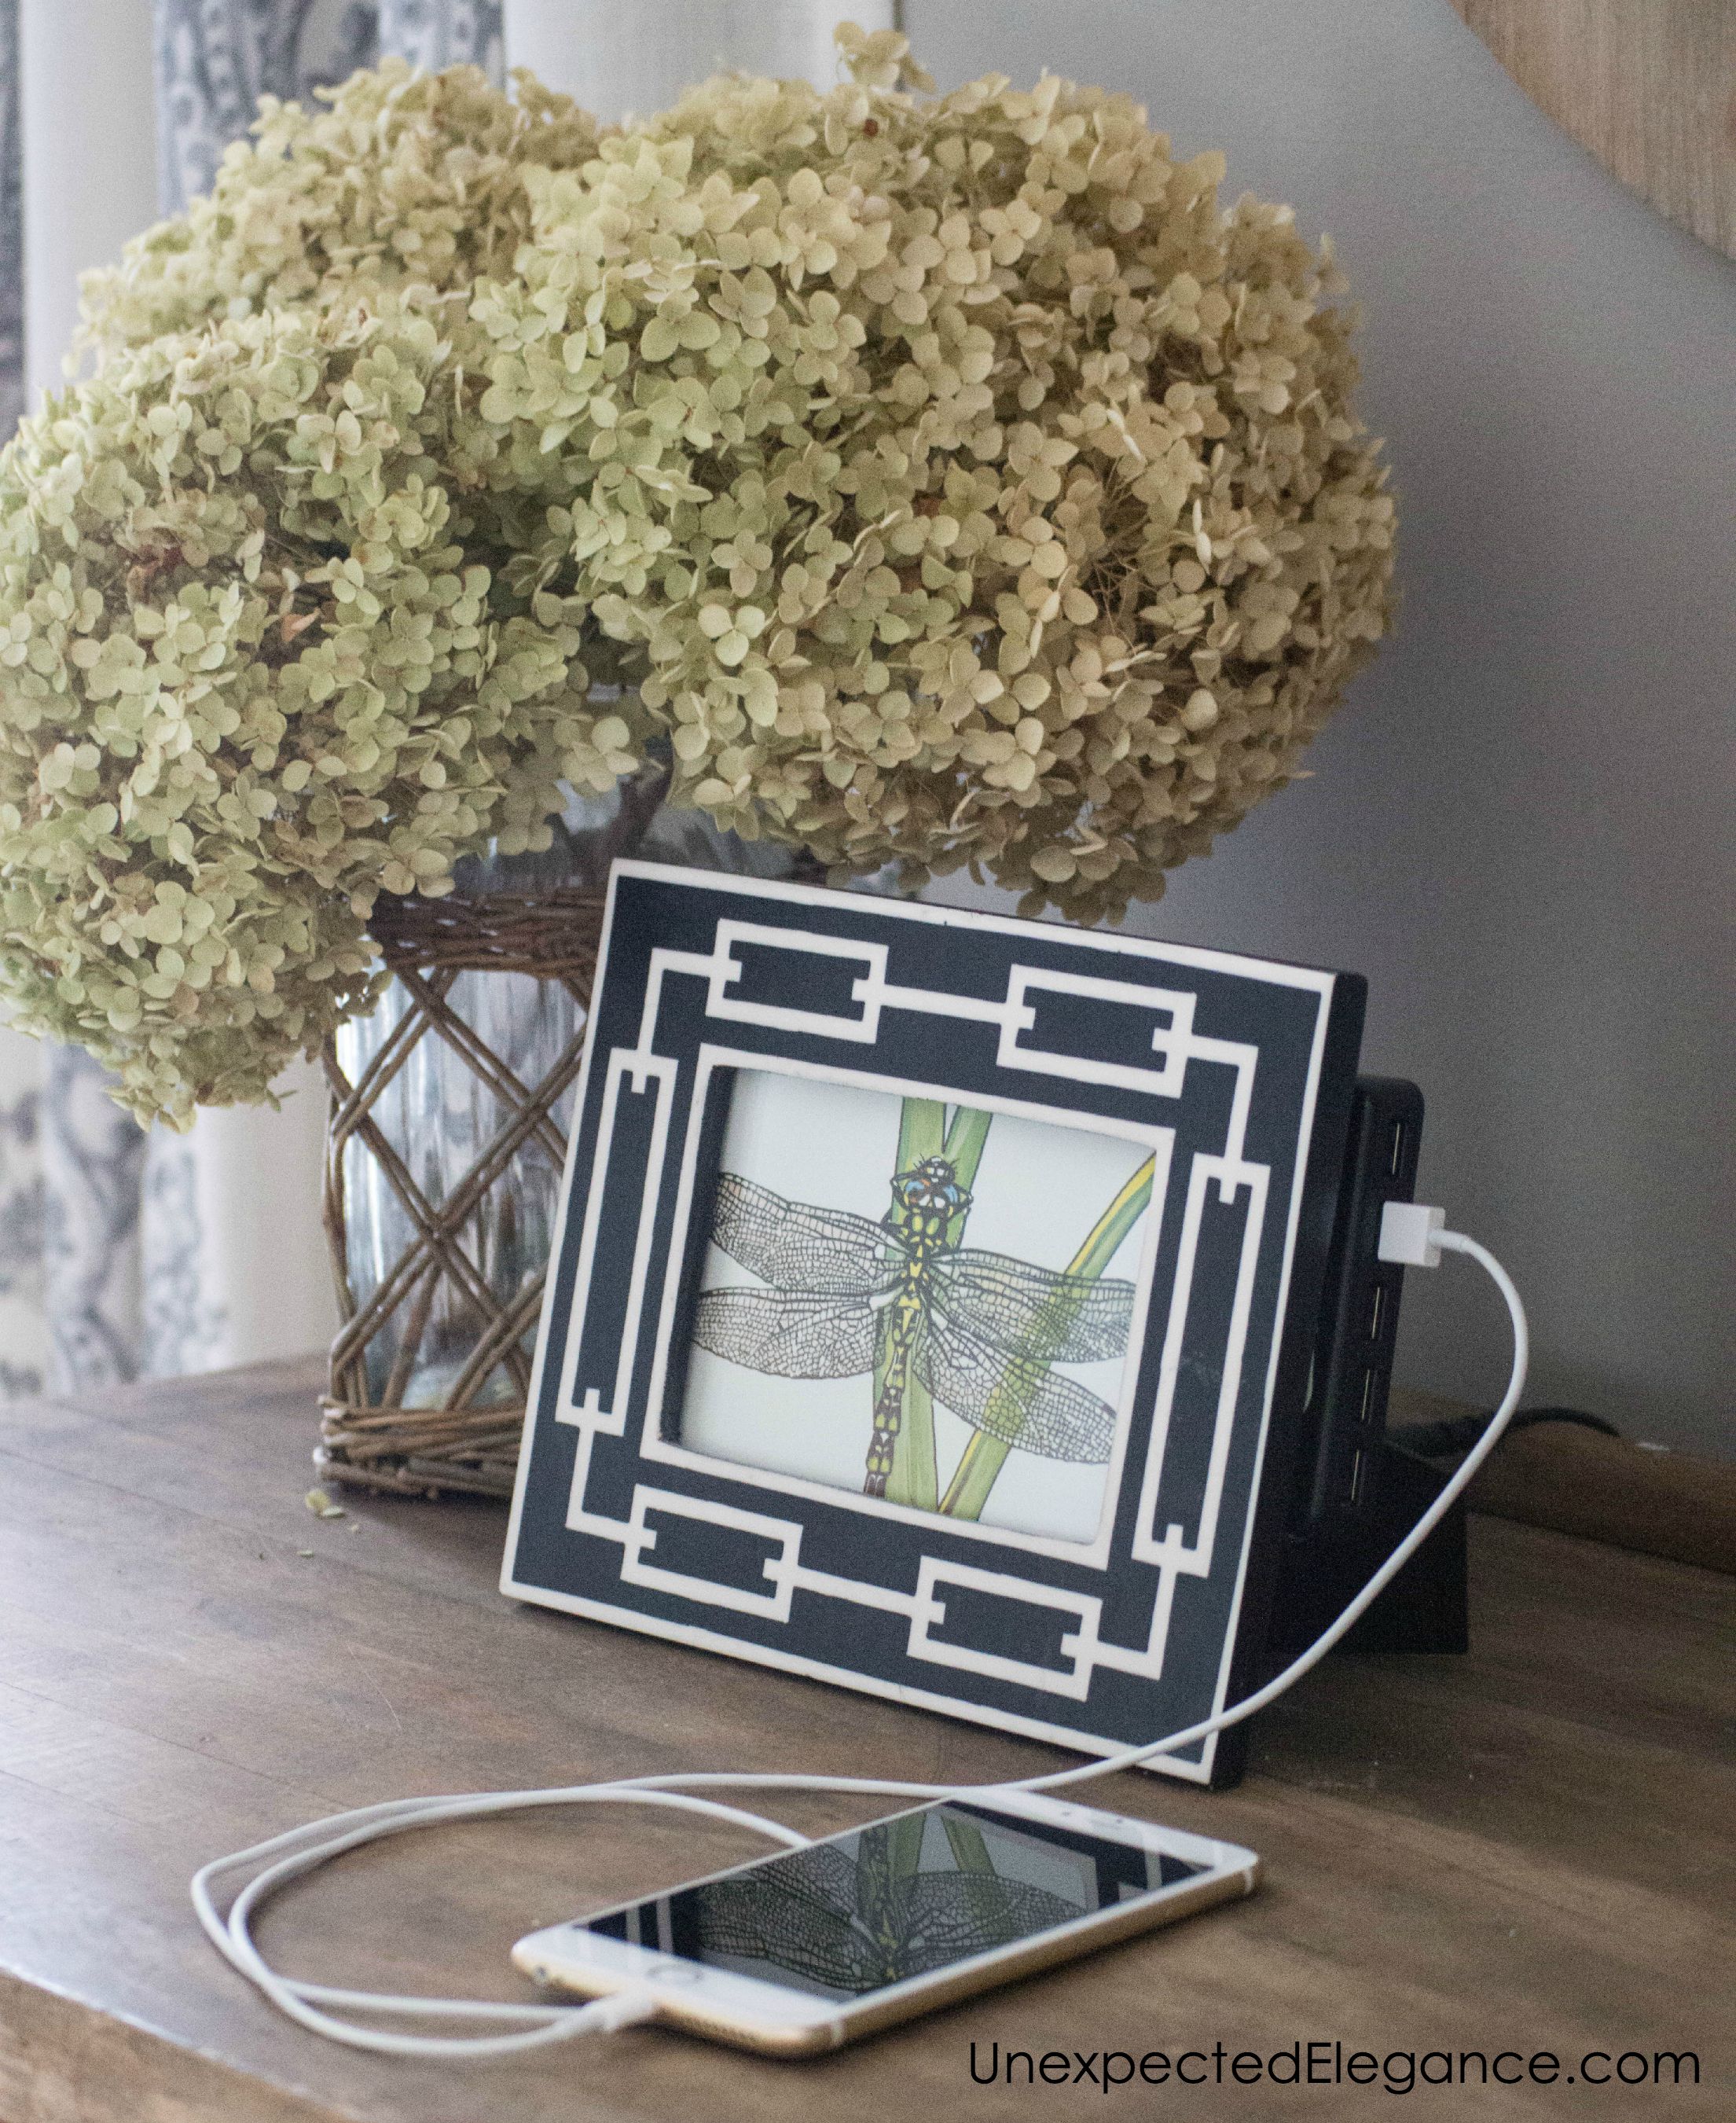 Are you tired of the mess of cords? Here's an EASY and quick DIY charging station that's not only functional but pretty too!